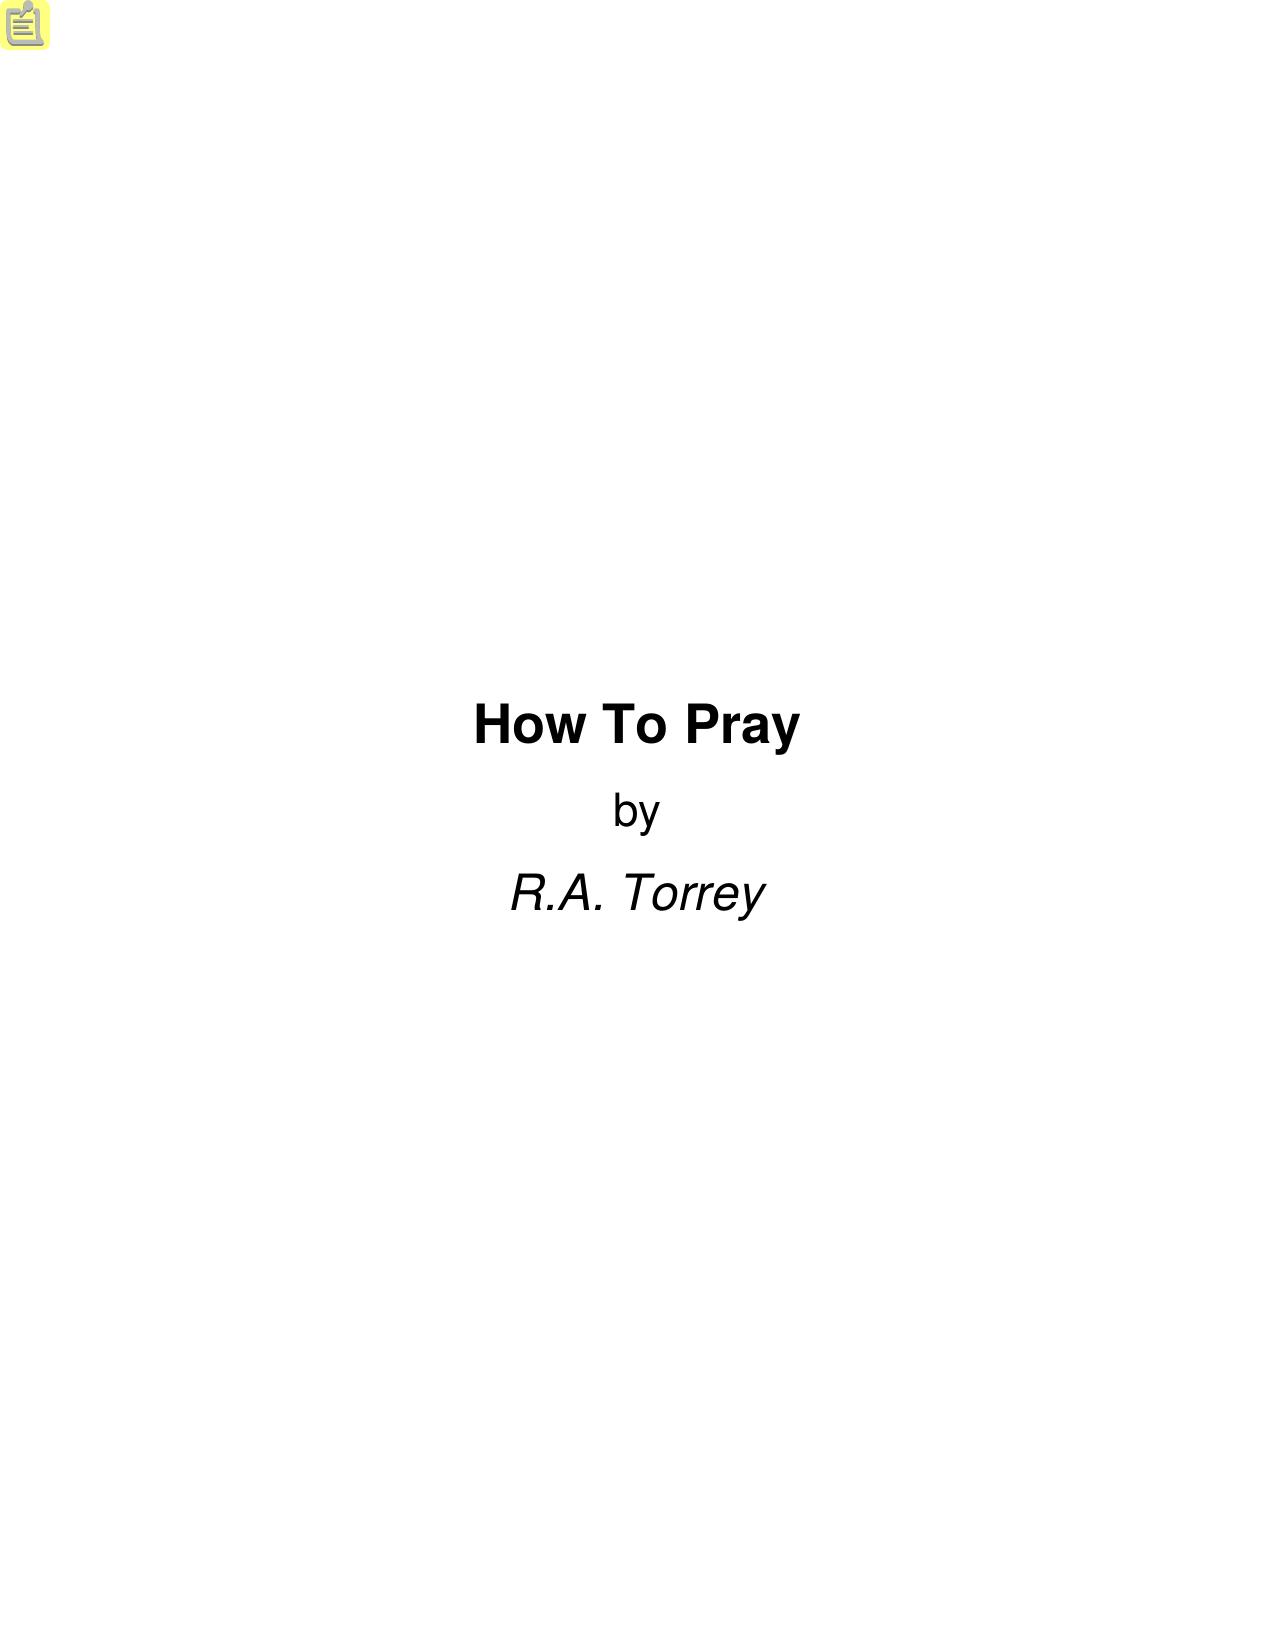 How To Pray by R.A. Torrey